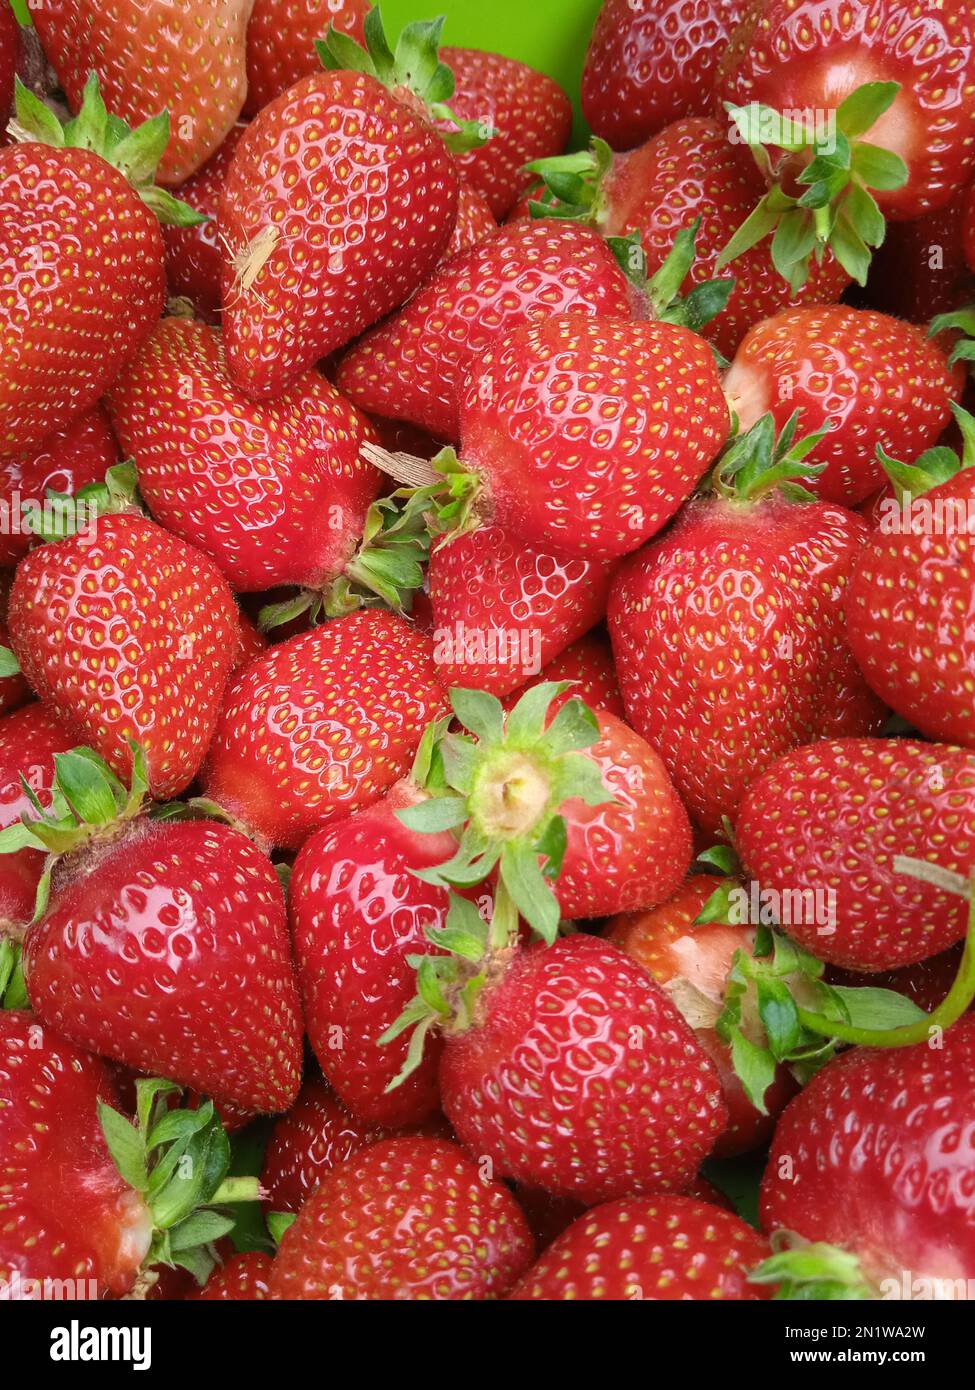 A vertical closeup shot of a pile of delicious juicy red strawberries Stock Photo